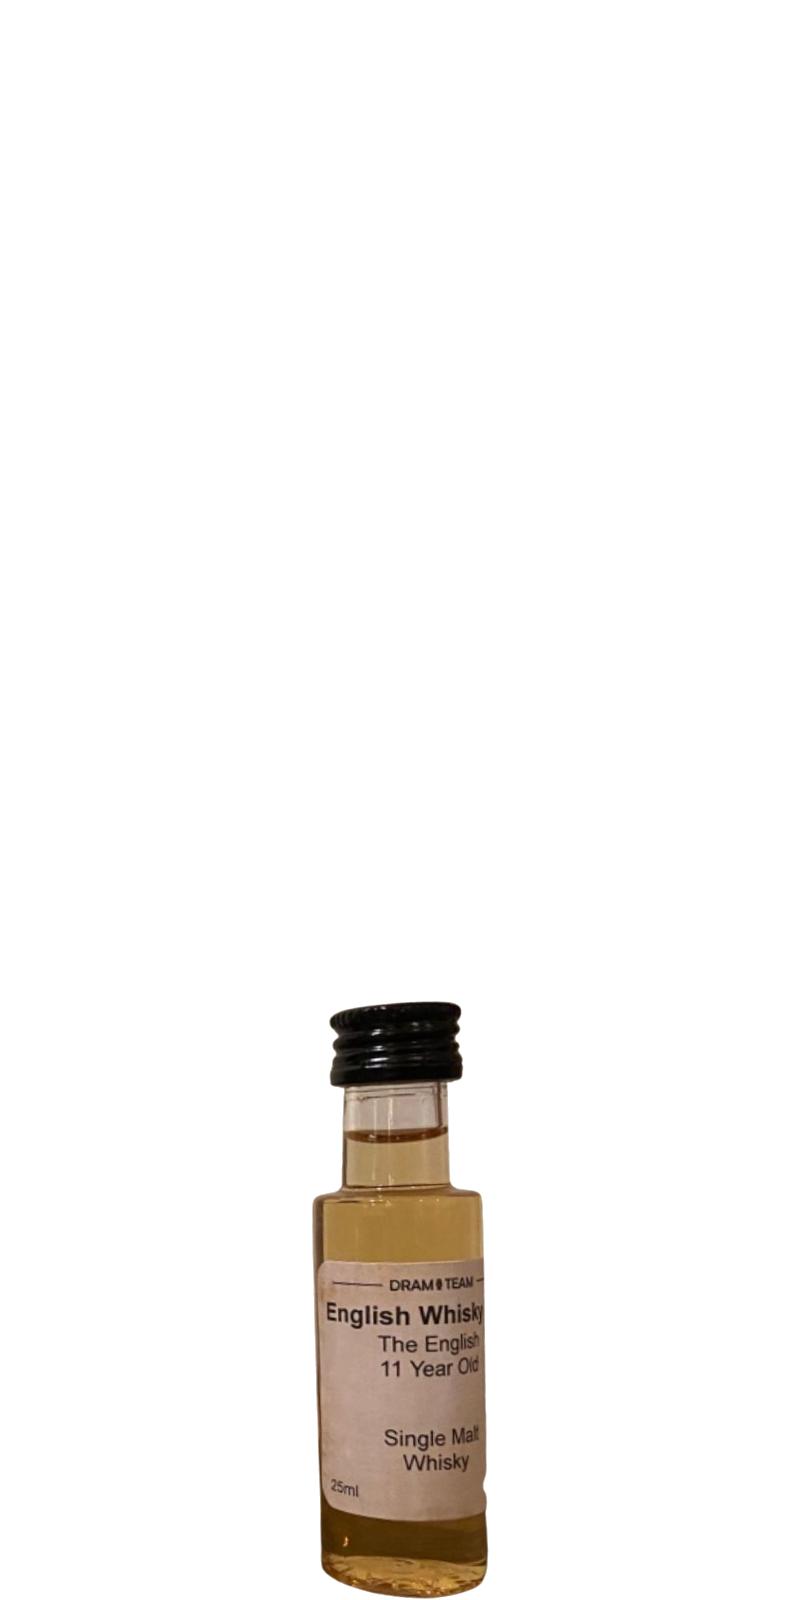 The English Whisky 11-year-old TDT